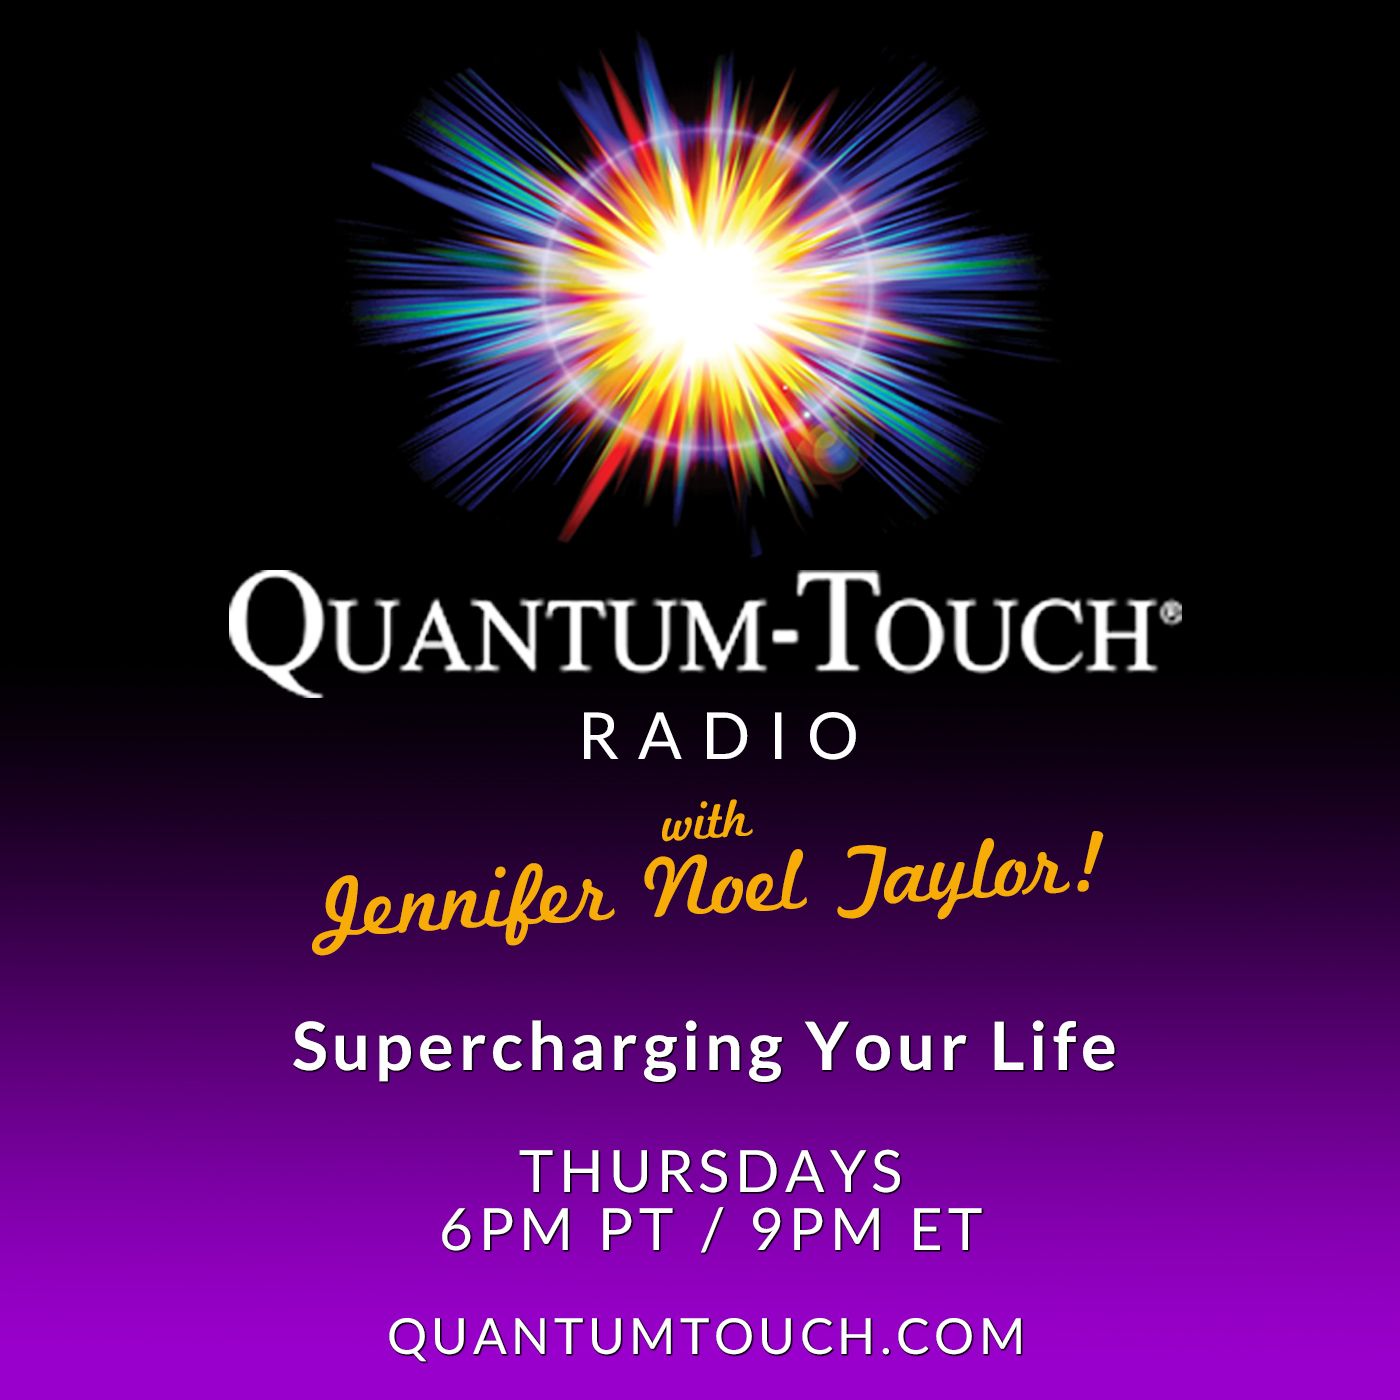 Quantum-Touch® Radio with Jennifer Noel Taylor: Supercharging Your Life!: Special Guest Carol Lee, Quantum-Touch Instructor and Spiritual Co